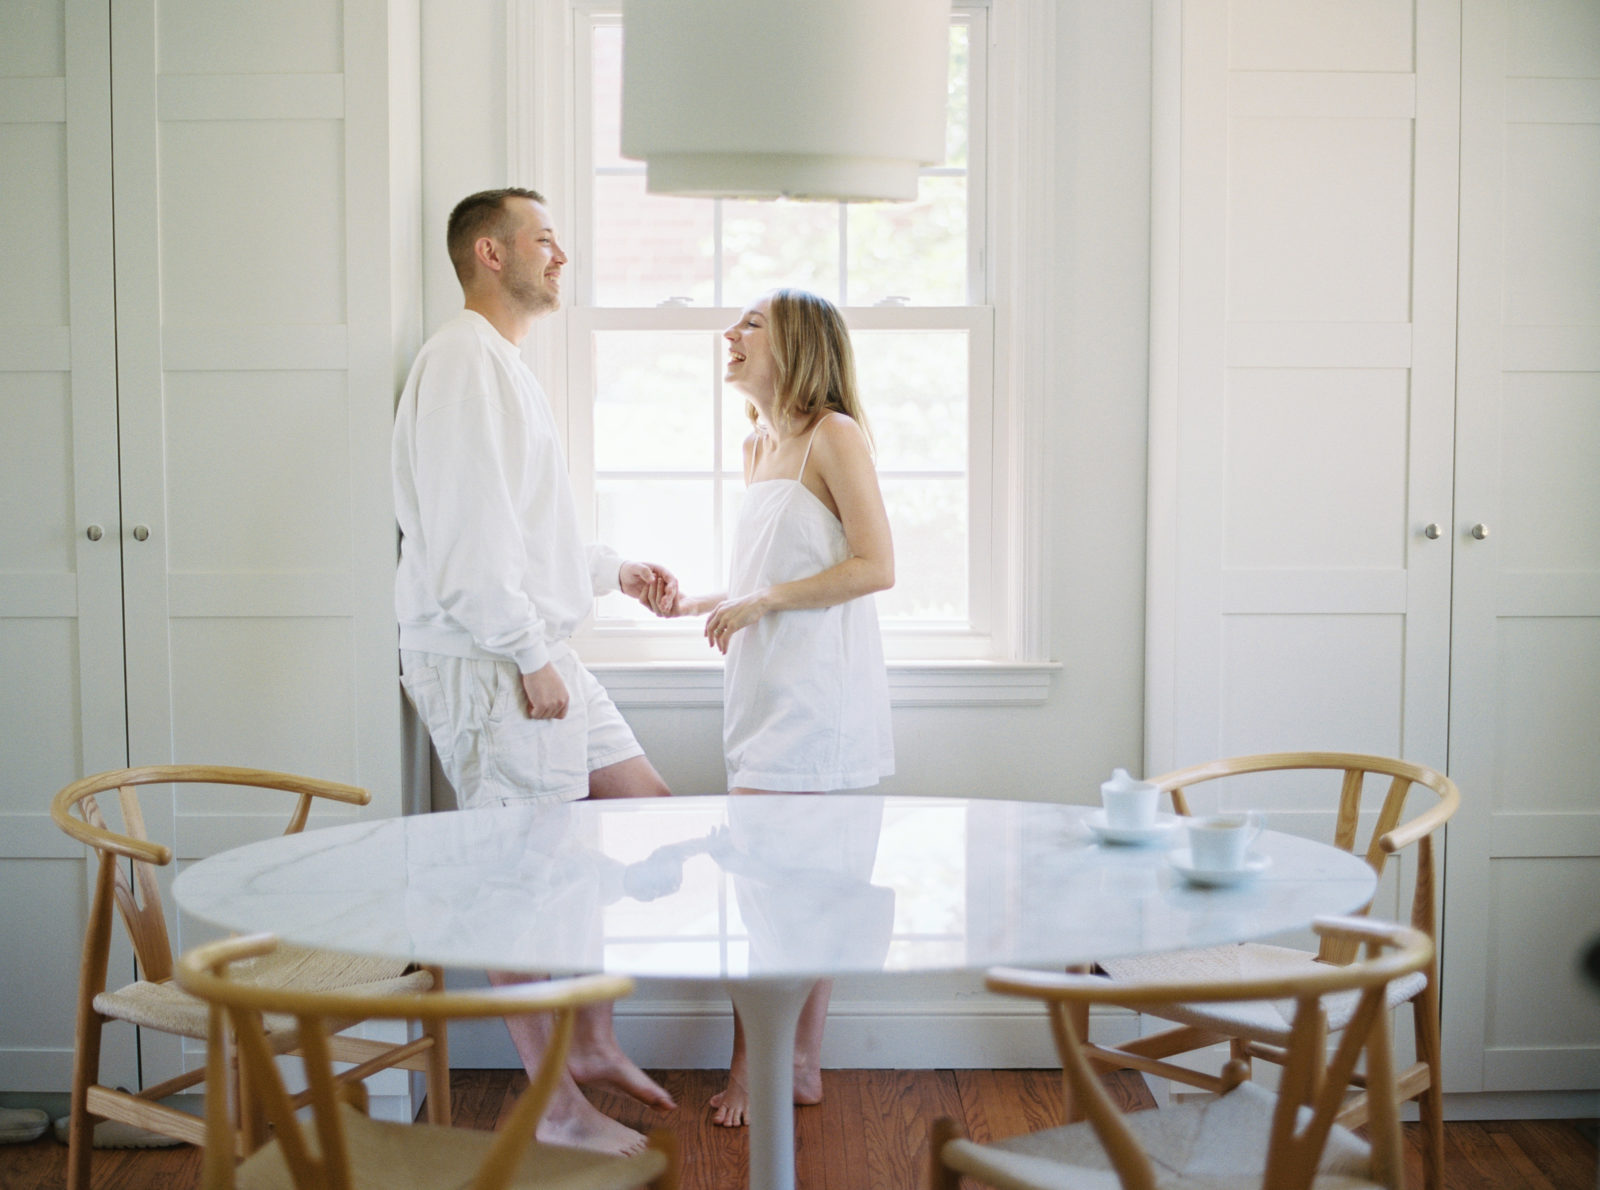 Couple laughing in the kitchen against a window.